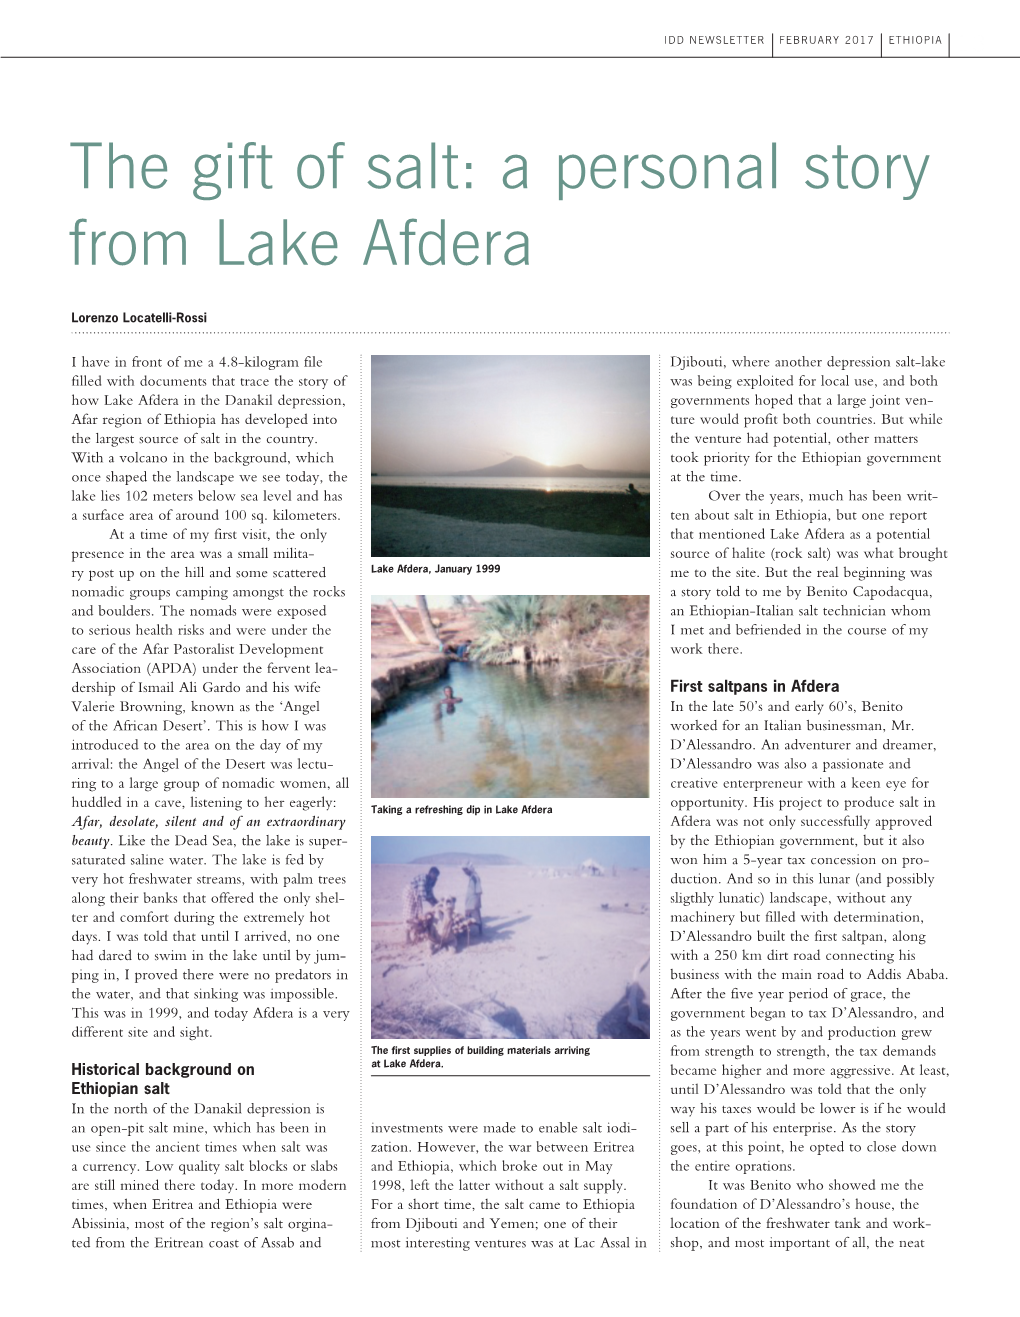 The Gift of Salt: a Personal Story from Lake Afdera